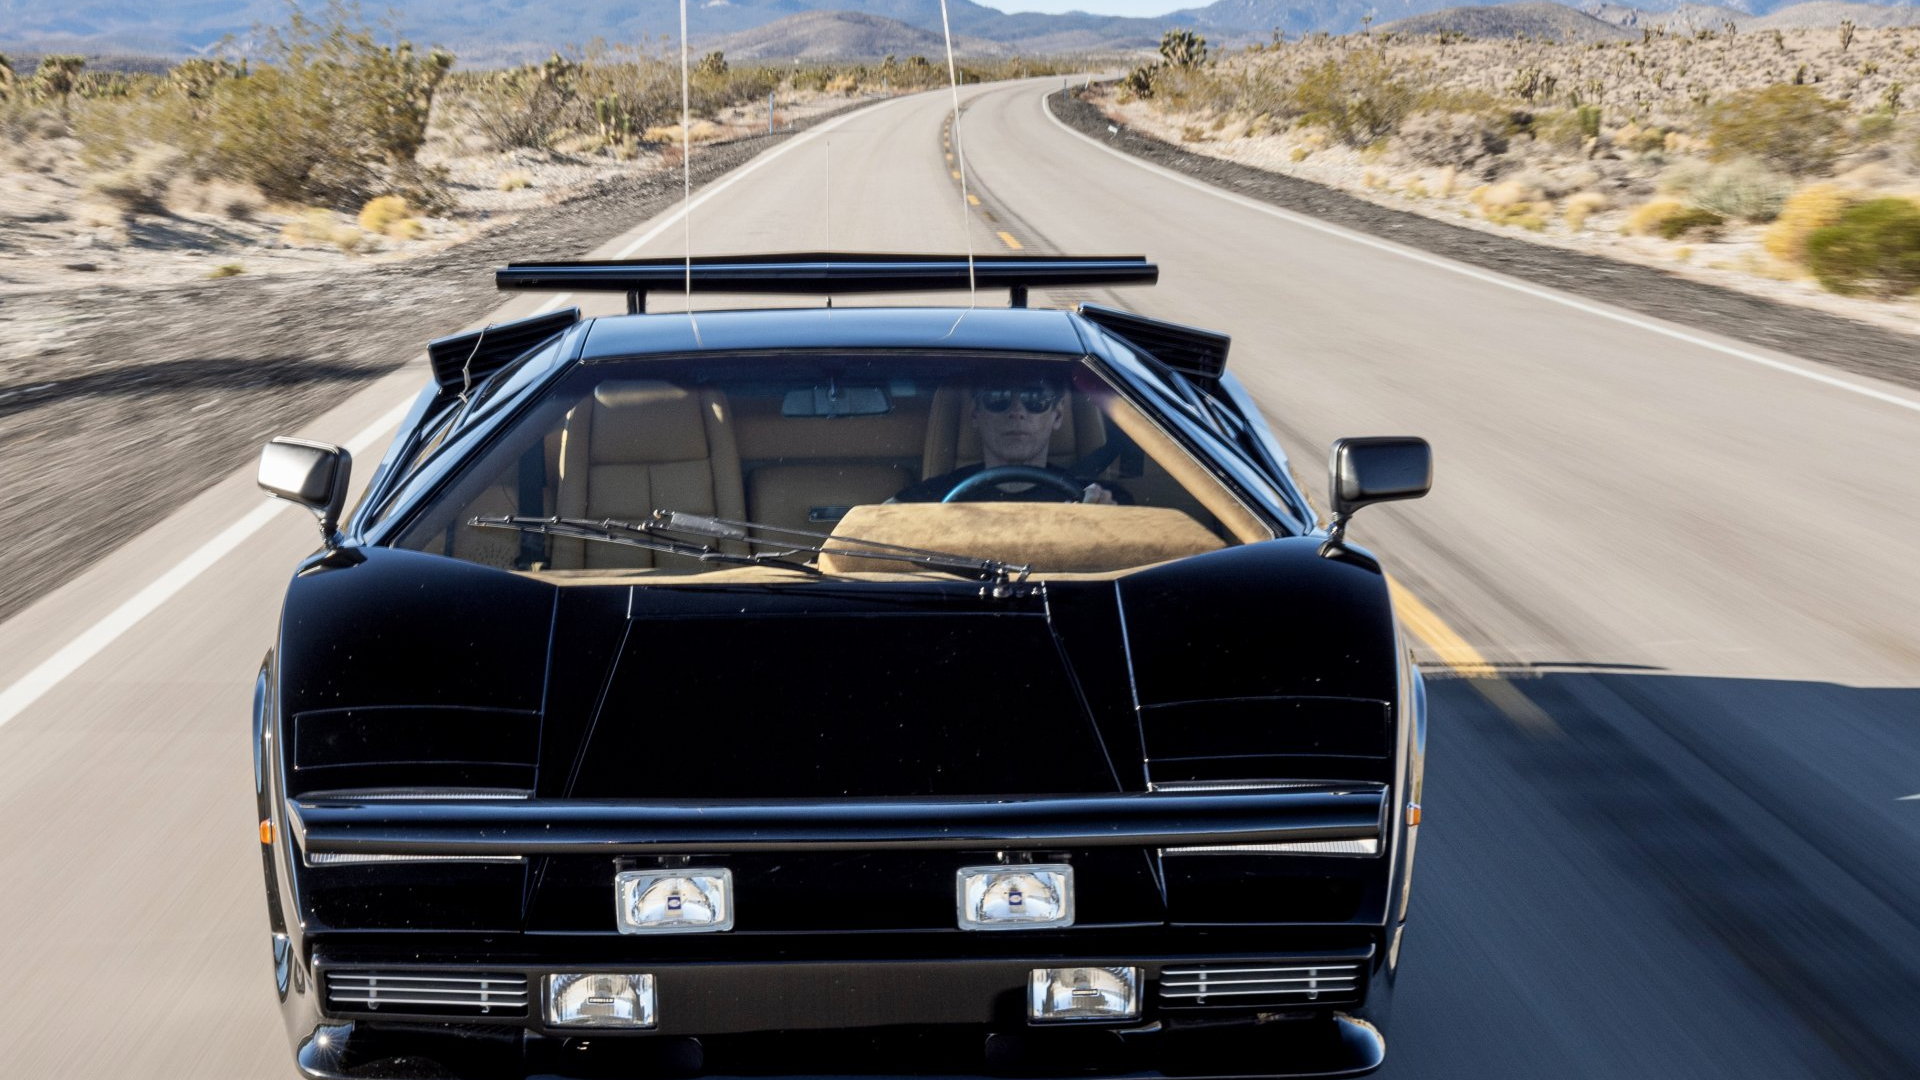 Lamborghini Countach from the "Cannonball Run'" movie | Hagerty Drivers Foundation photos